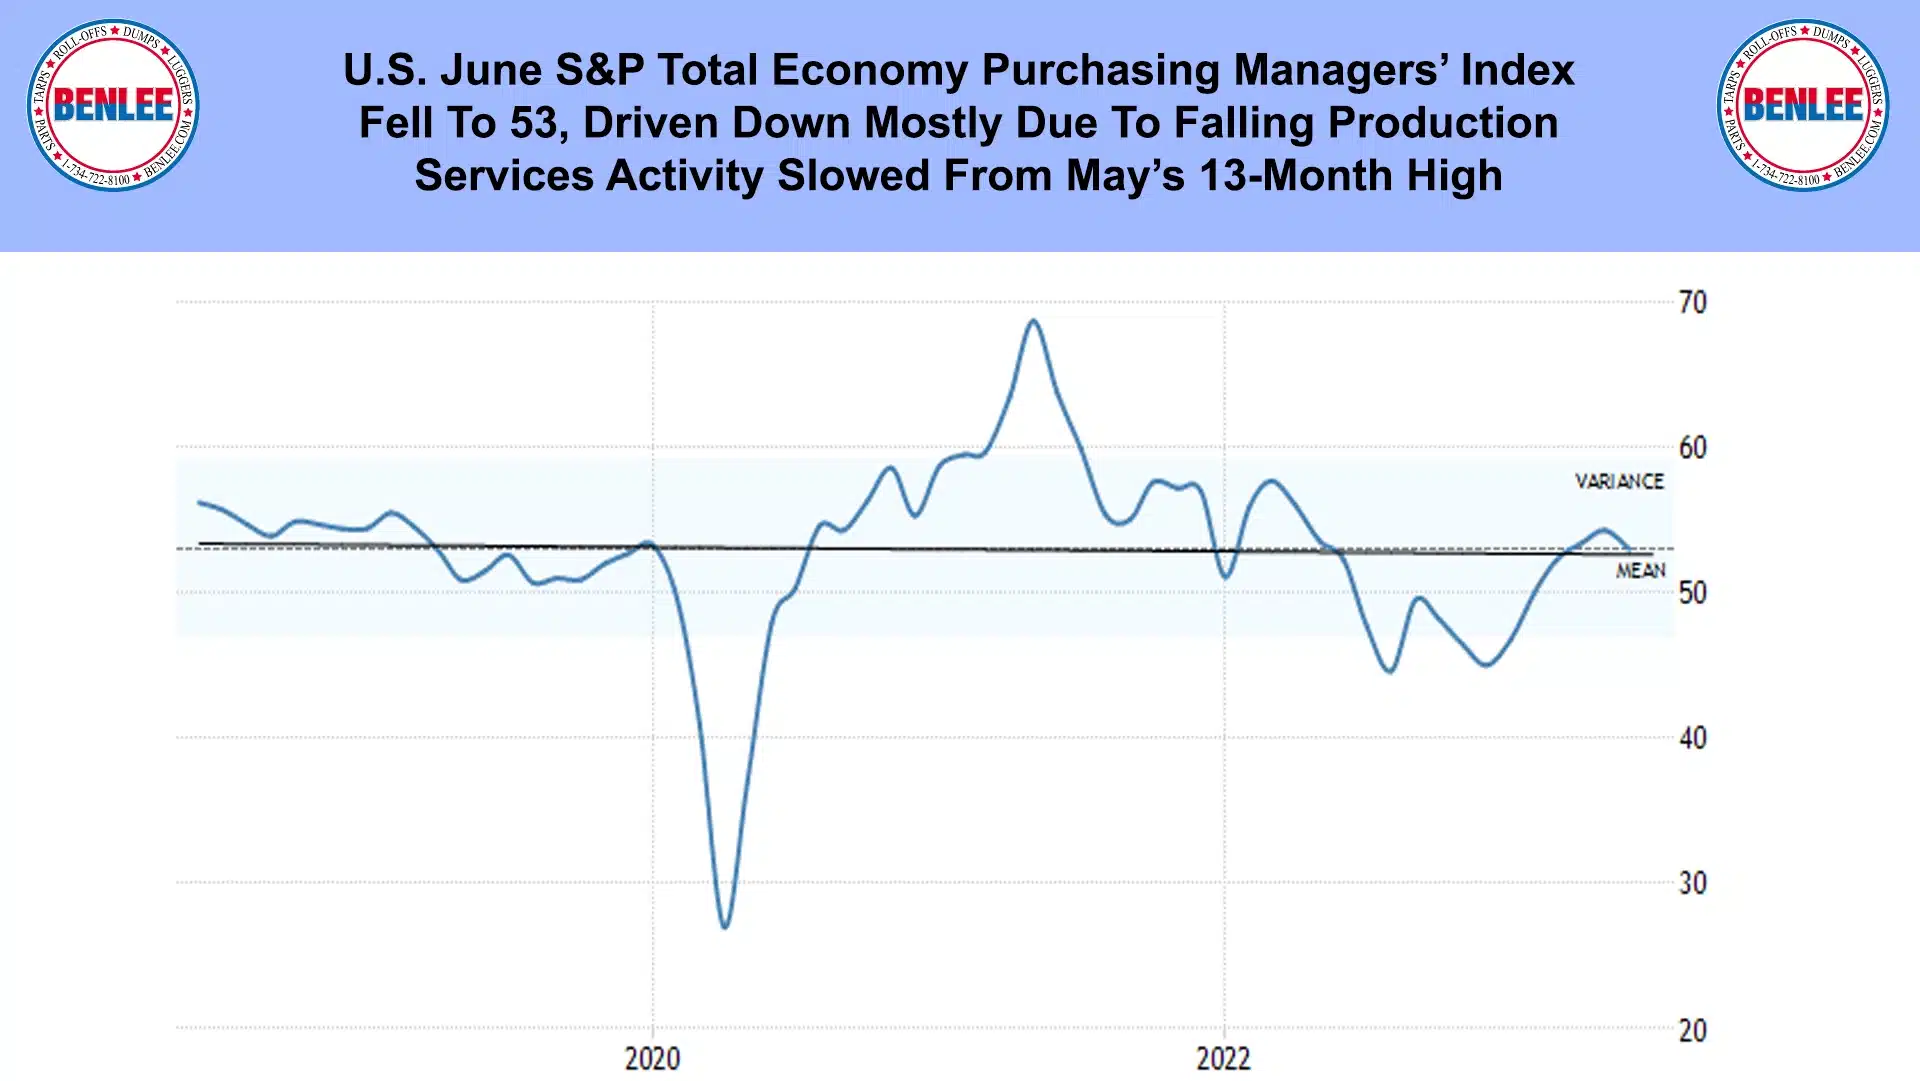 U.S. June S&P Total Economy Purchasing Managers' Index